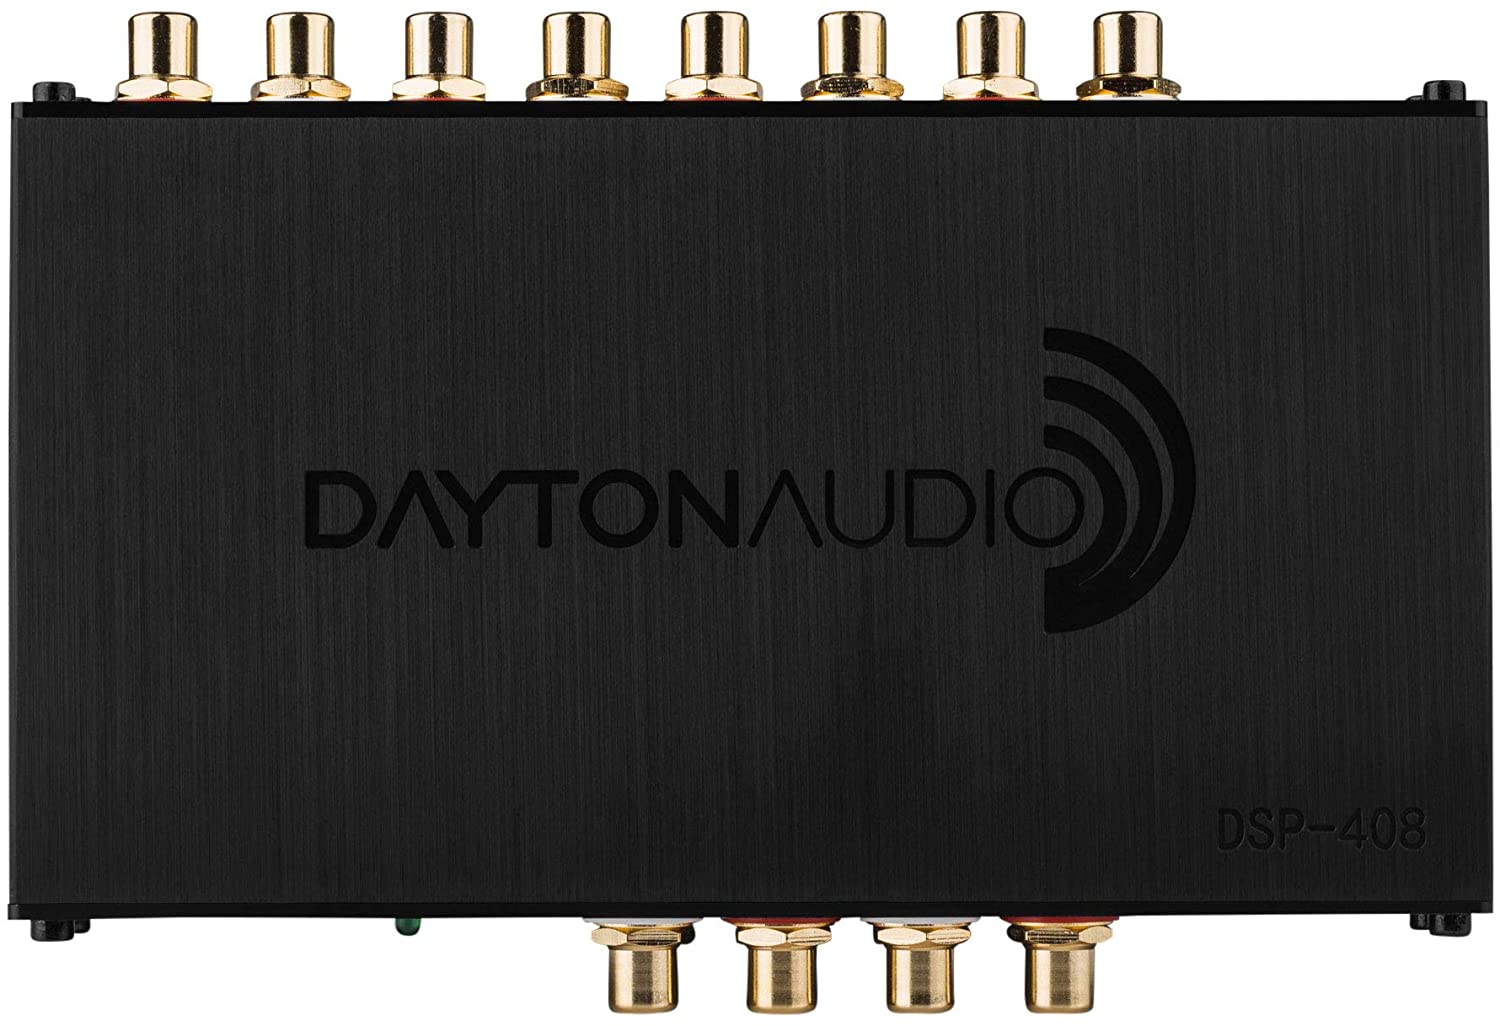 [Used] Dayton Audio DSP-408 4x8 DSP Digital Signal Processor for Home and Car Audio